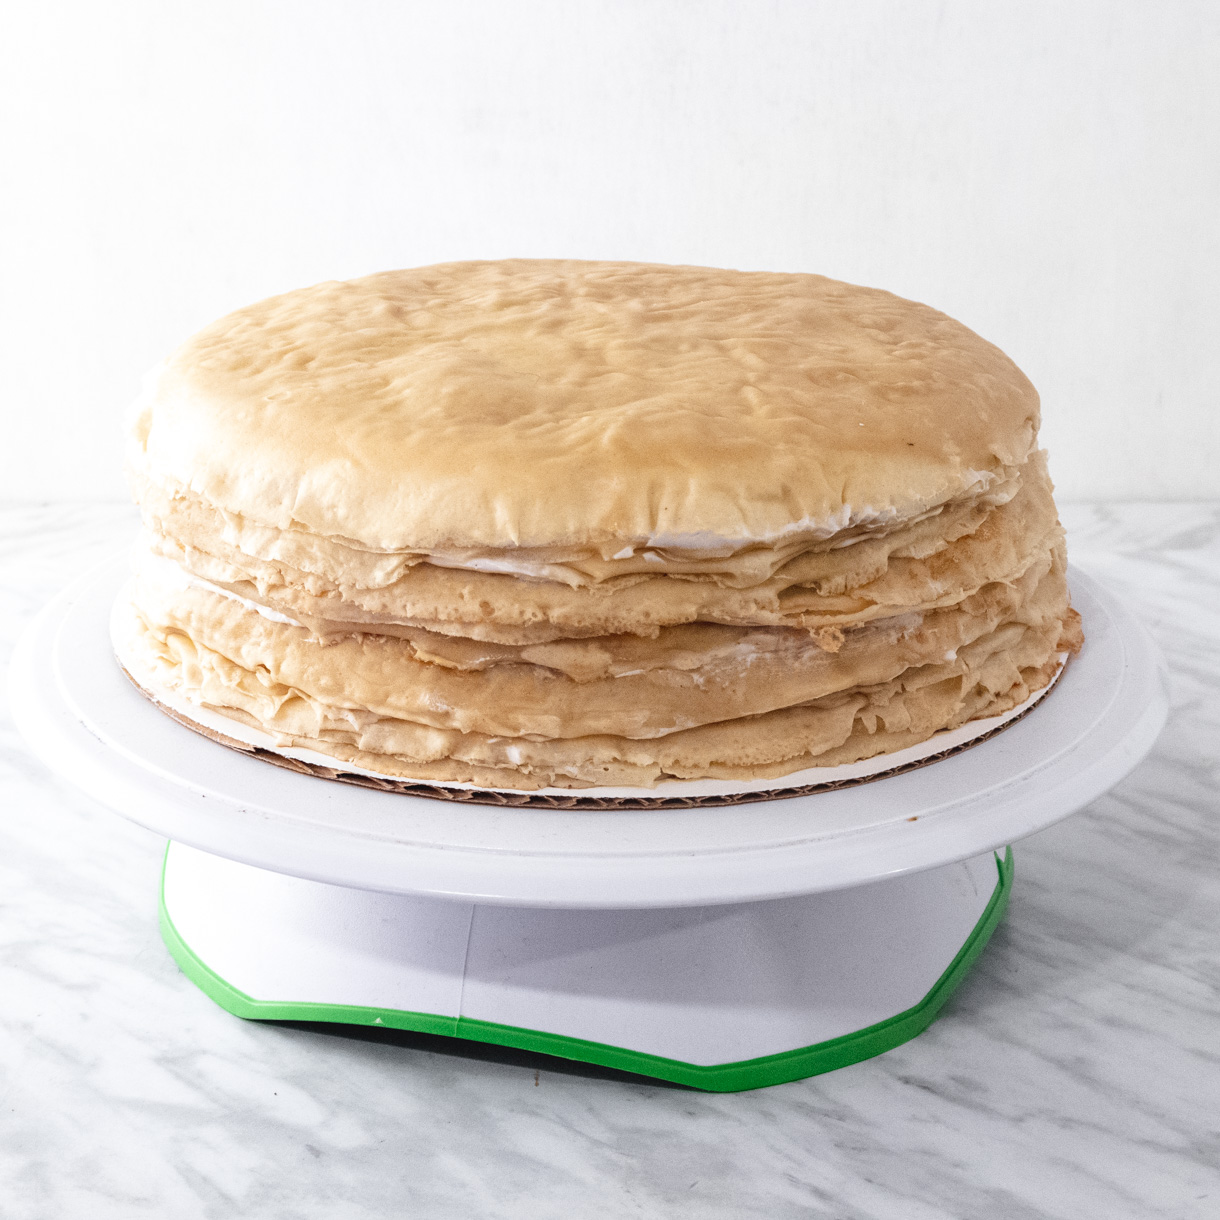 Assembled mille crepe cake on a turntable without the caramelized sugar top.